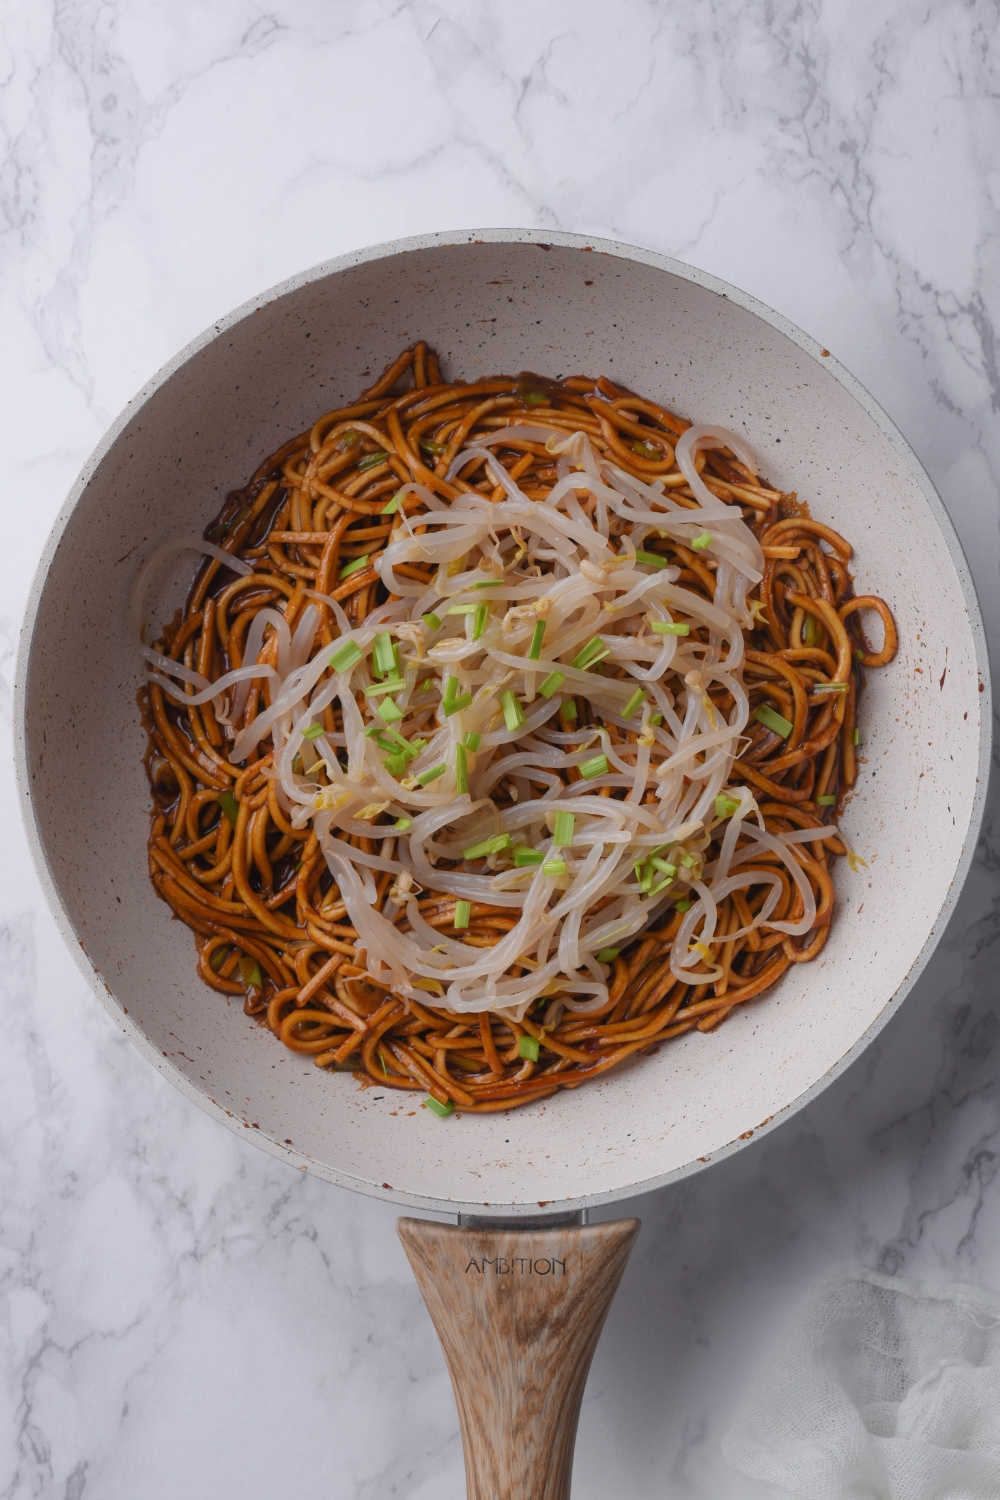 An overhead view of a skillet with pan fried noodles topped with bean sprouts and green onion slices.